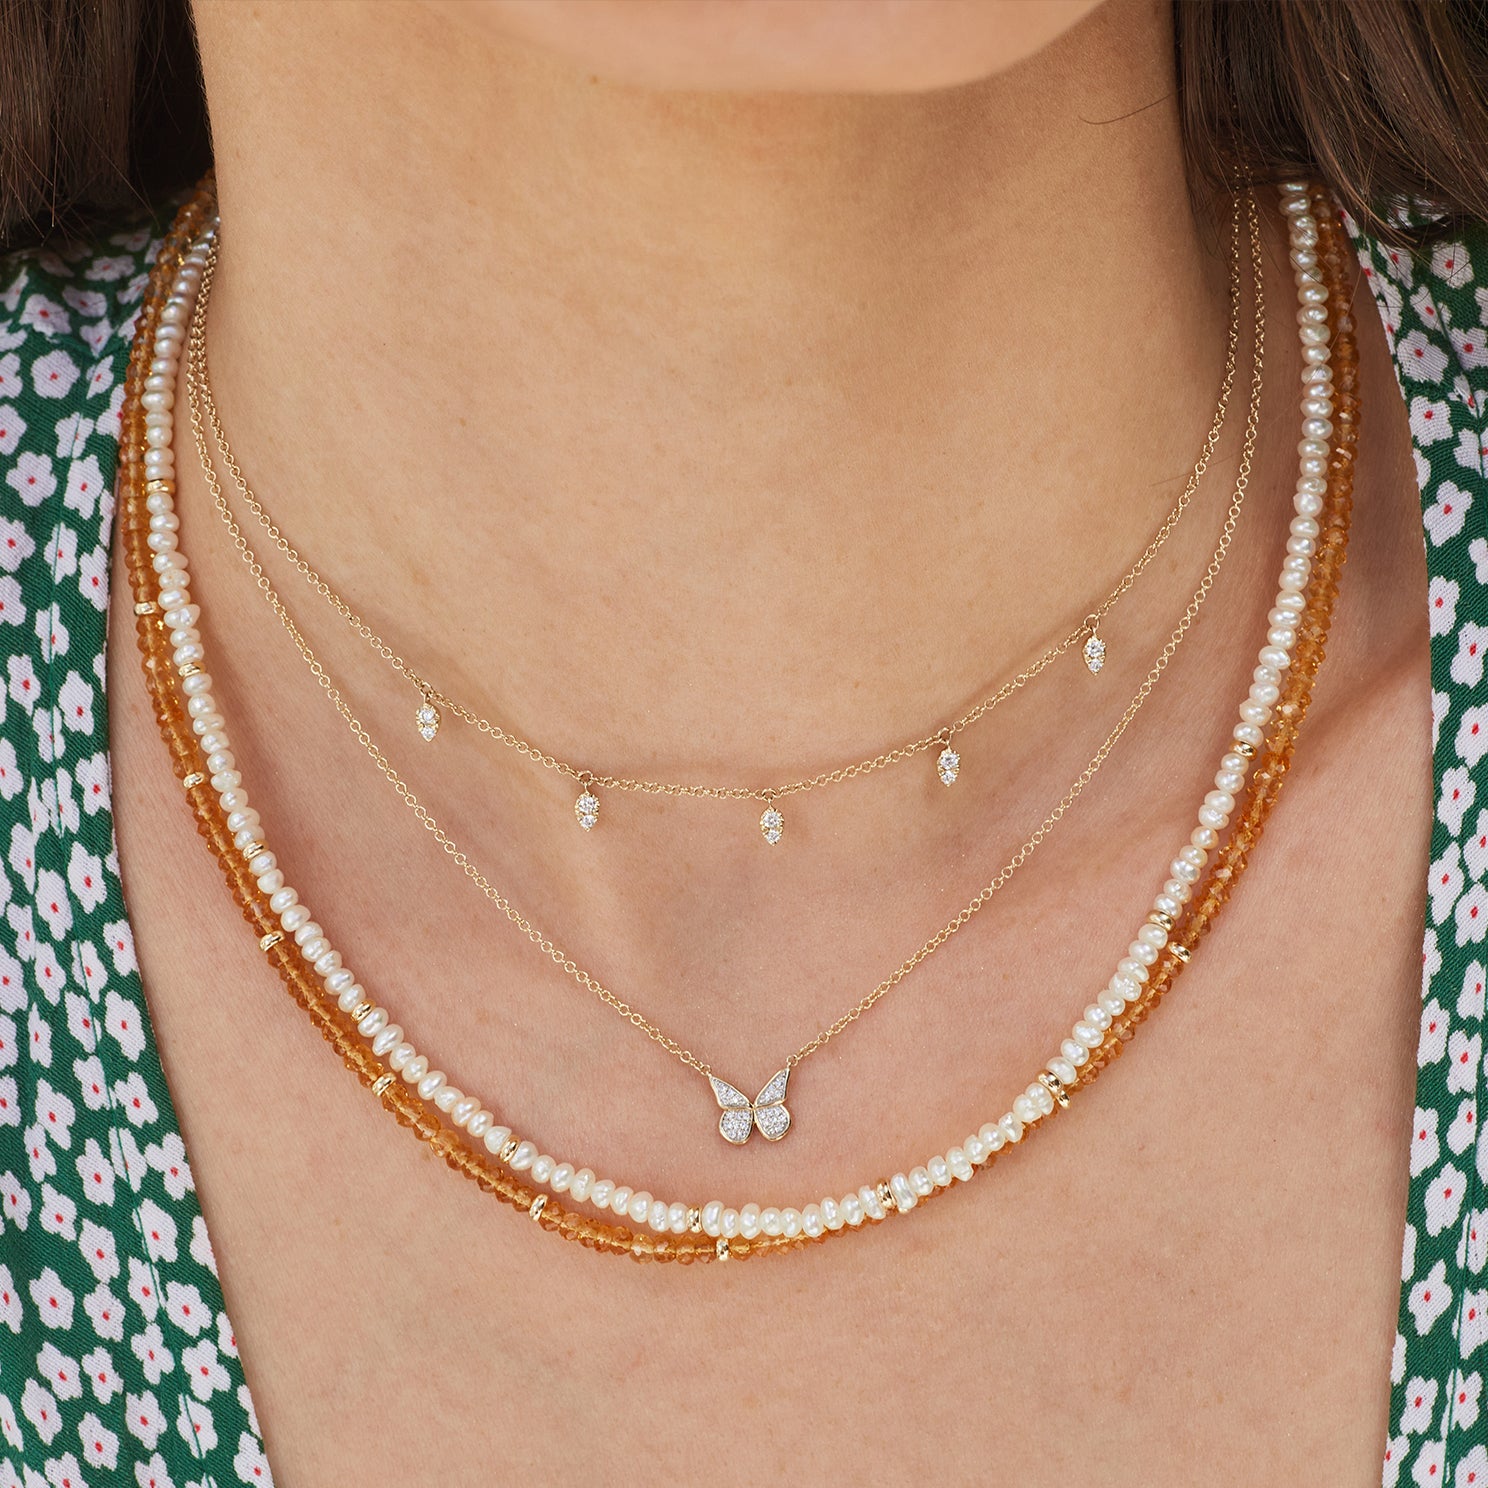 Diamond Flutter Necklace in 14k yellow gold styled on neck of model with diamond and gold necklace and two beaded necklaces